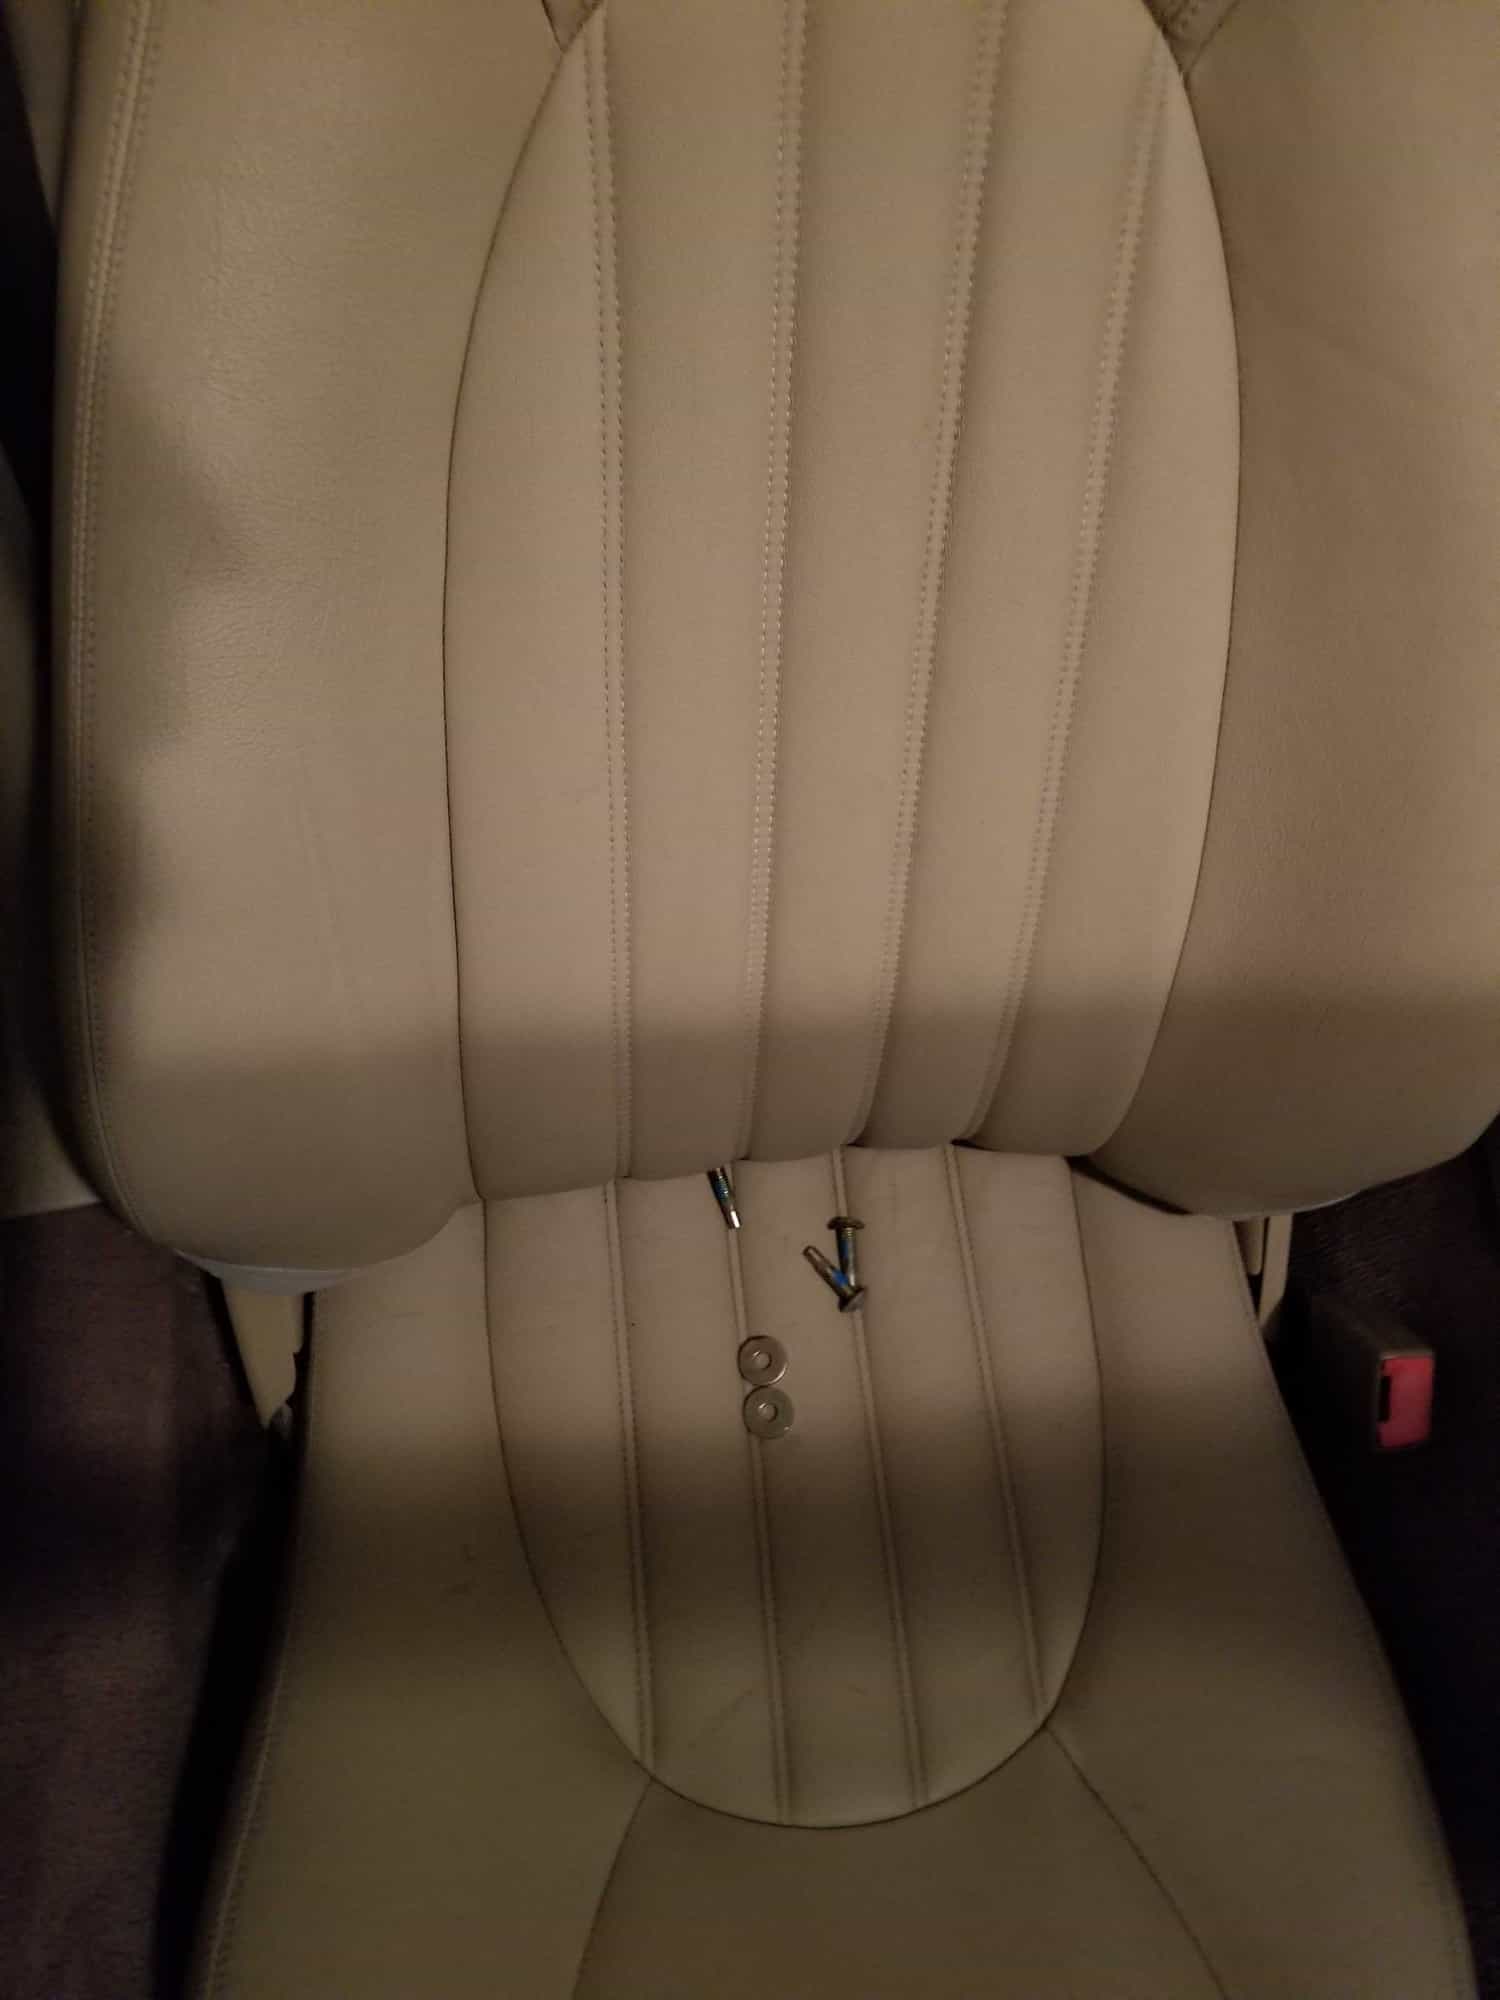 Interior/Upholstery - 1997-2000 0 XK8 XKR Leather Seat Replacement Upholstery  - SDZ - New - 1997 to 2000 Jaguar XK8 - Wood Ridge, NJ 07075, United States